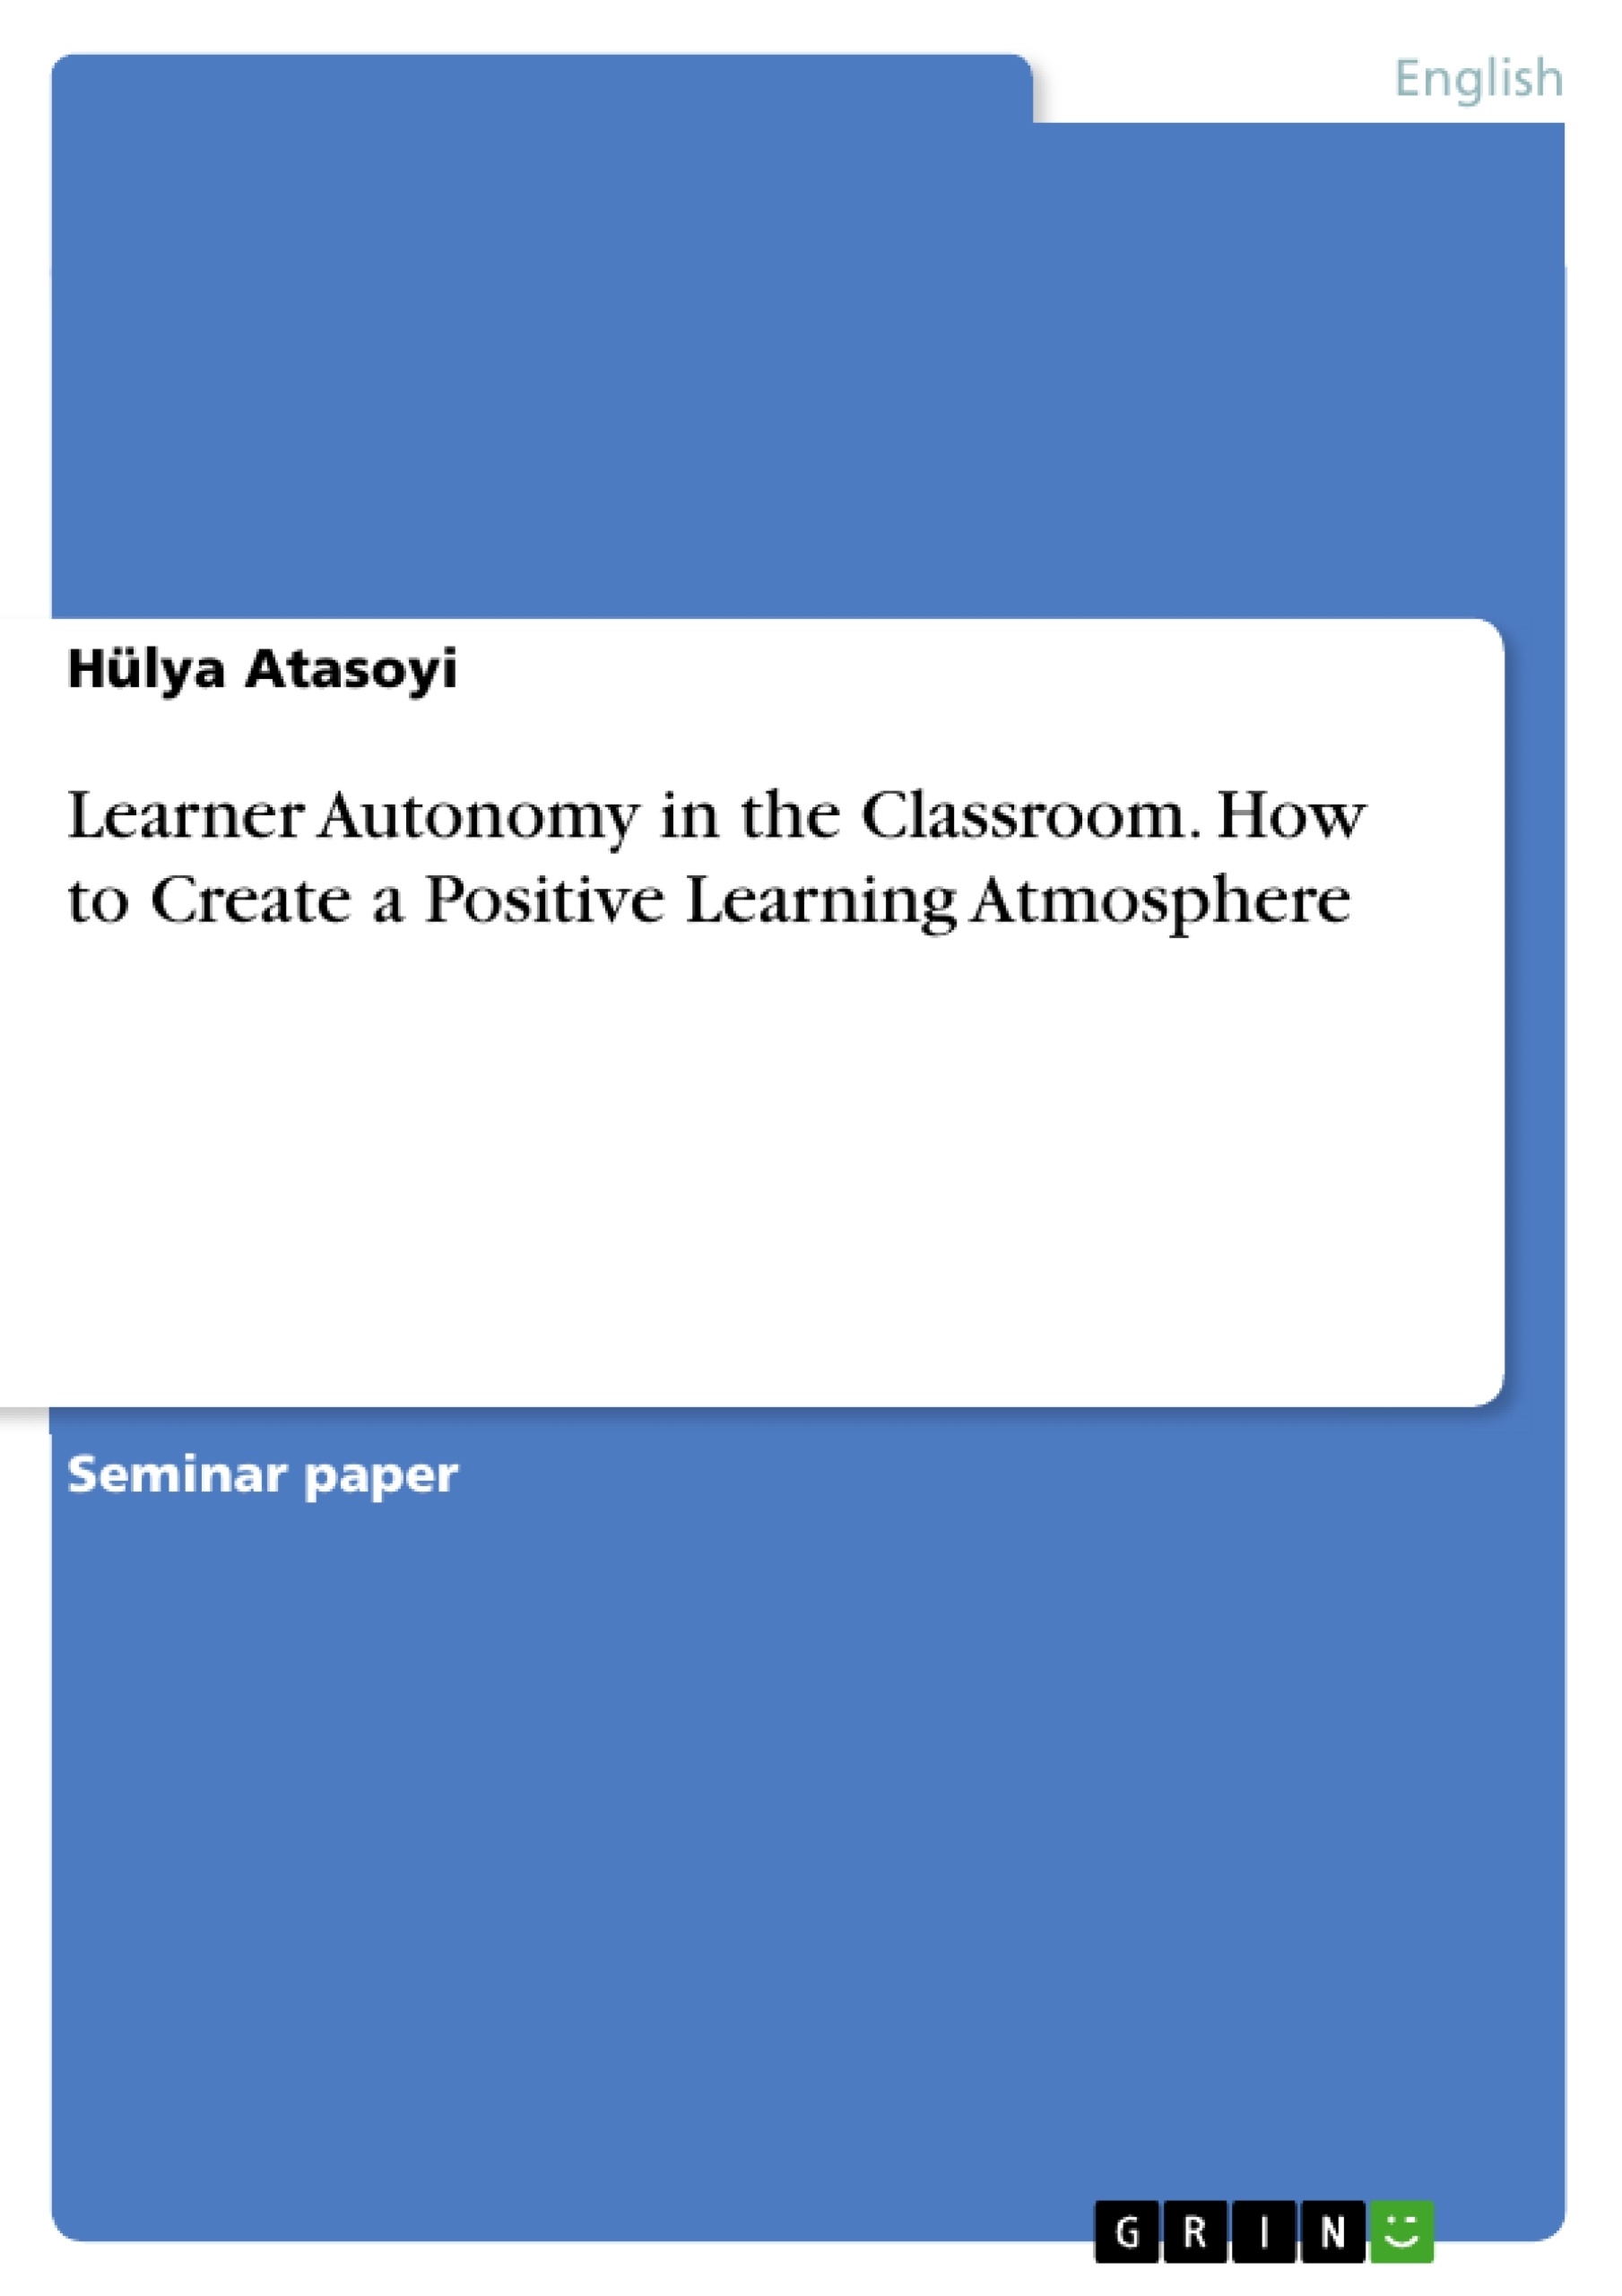 Title: Learner Autonomy in the Classroom. How to Create a Positive Learning Atmosphere